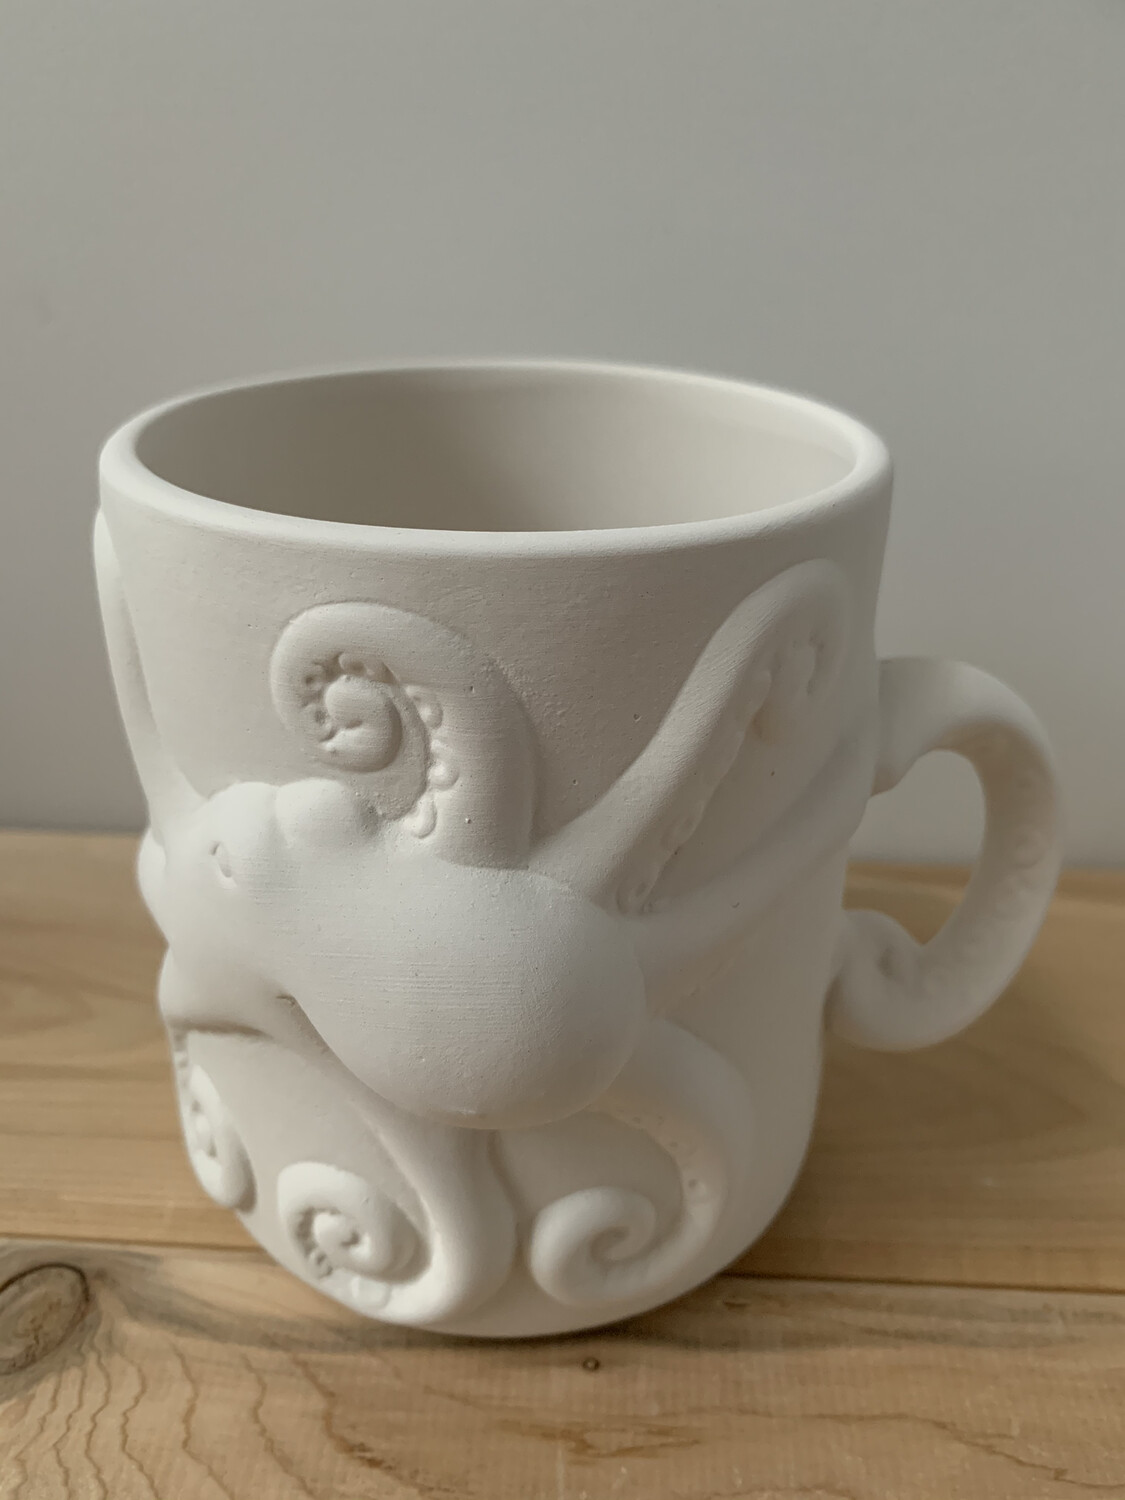 Paint Your Own Pottery - Ceramic
Octopus Mug Painting Kit